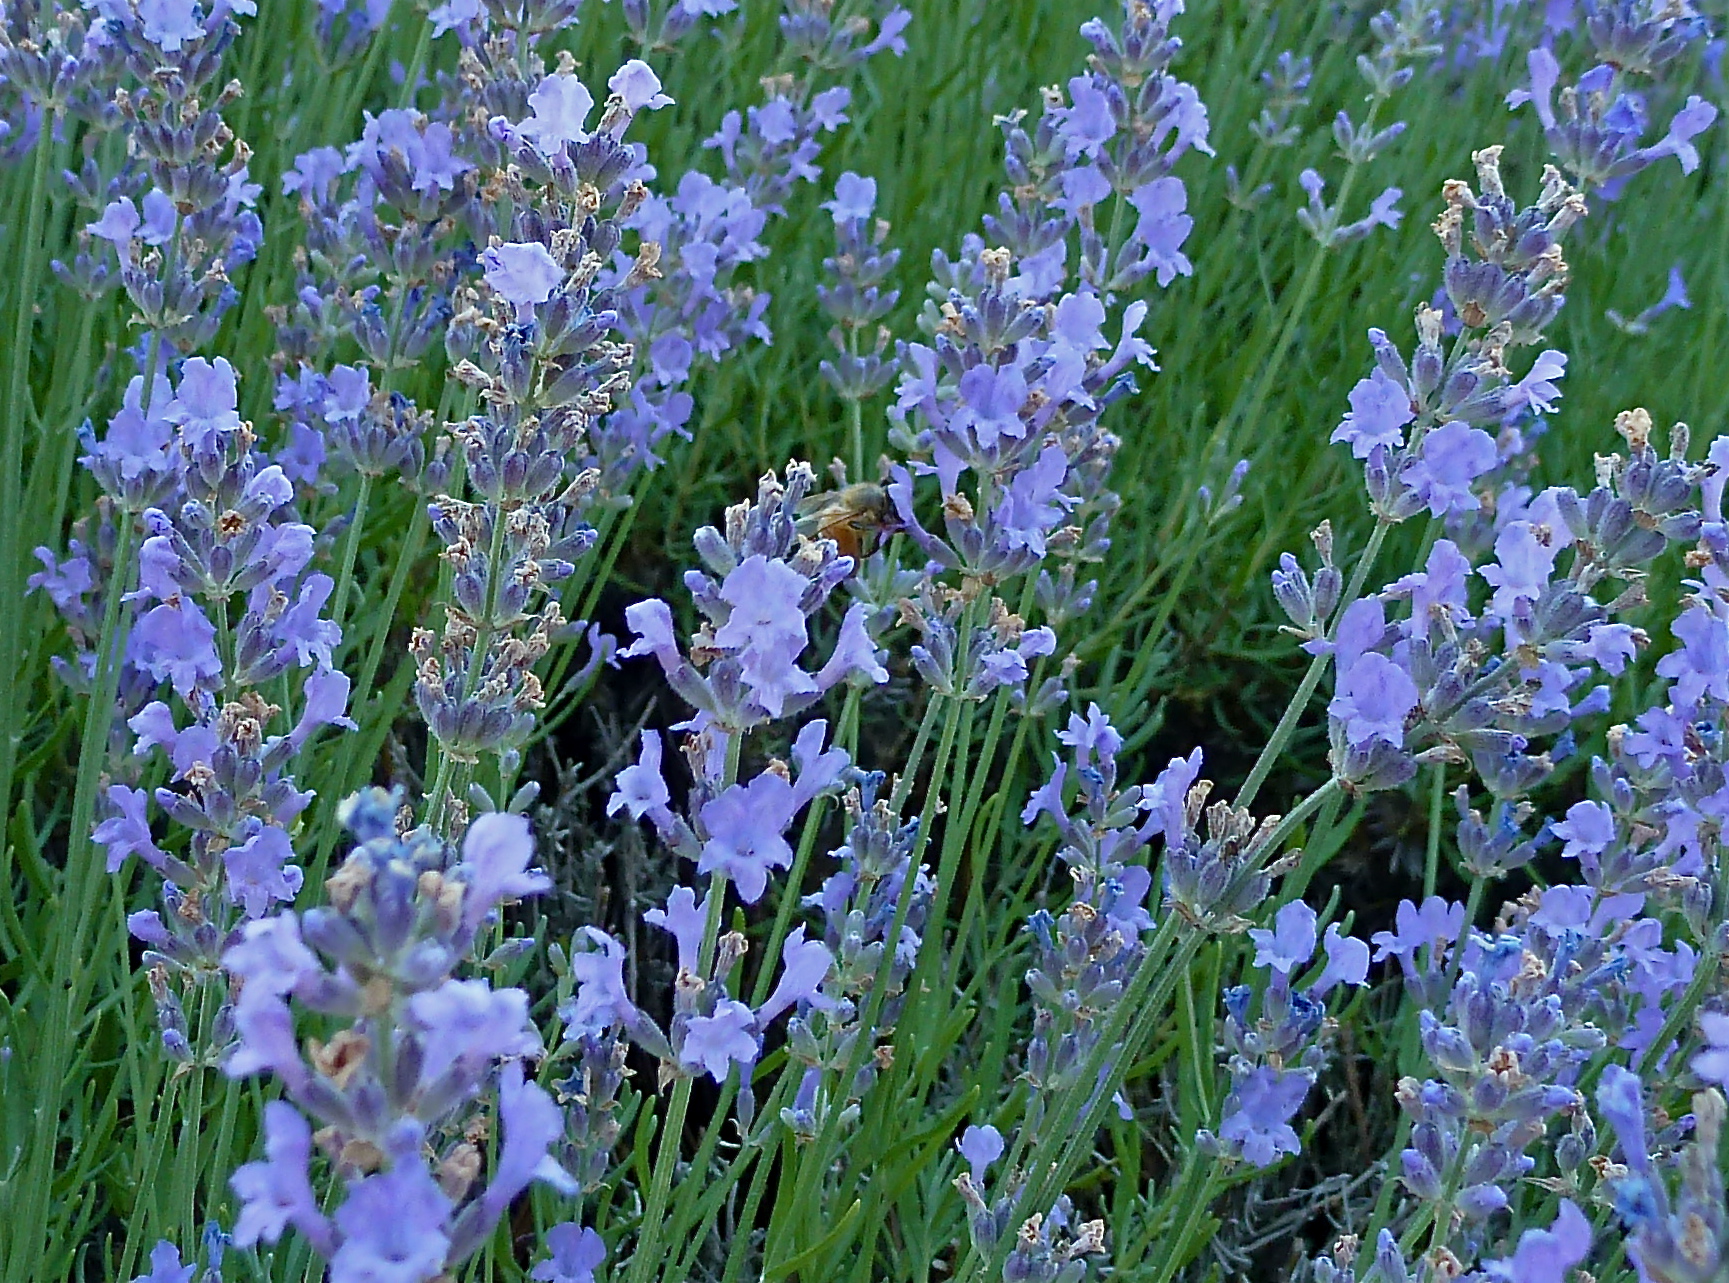 purple lavender plants growing in the grass